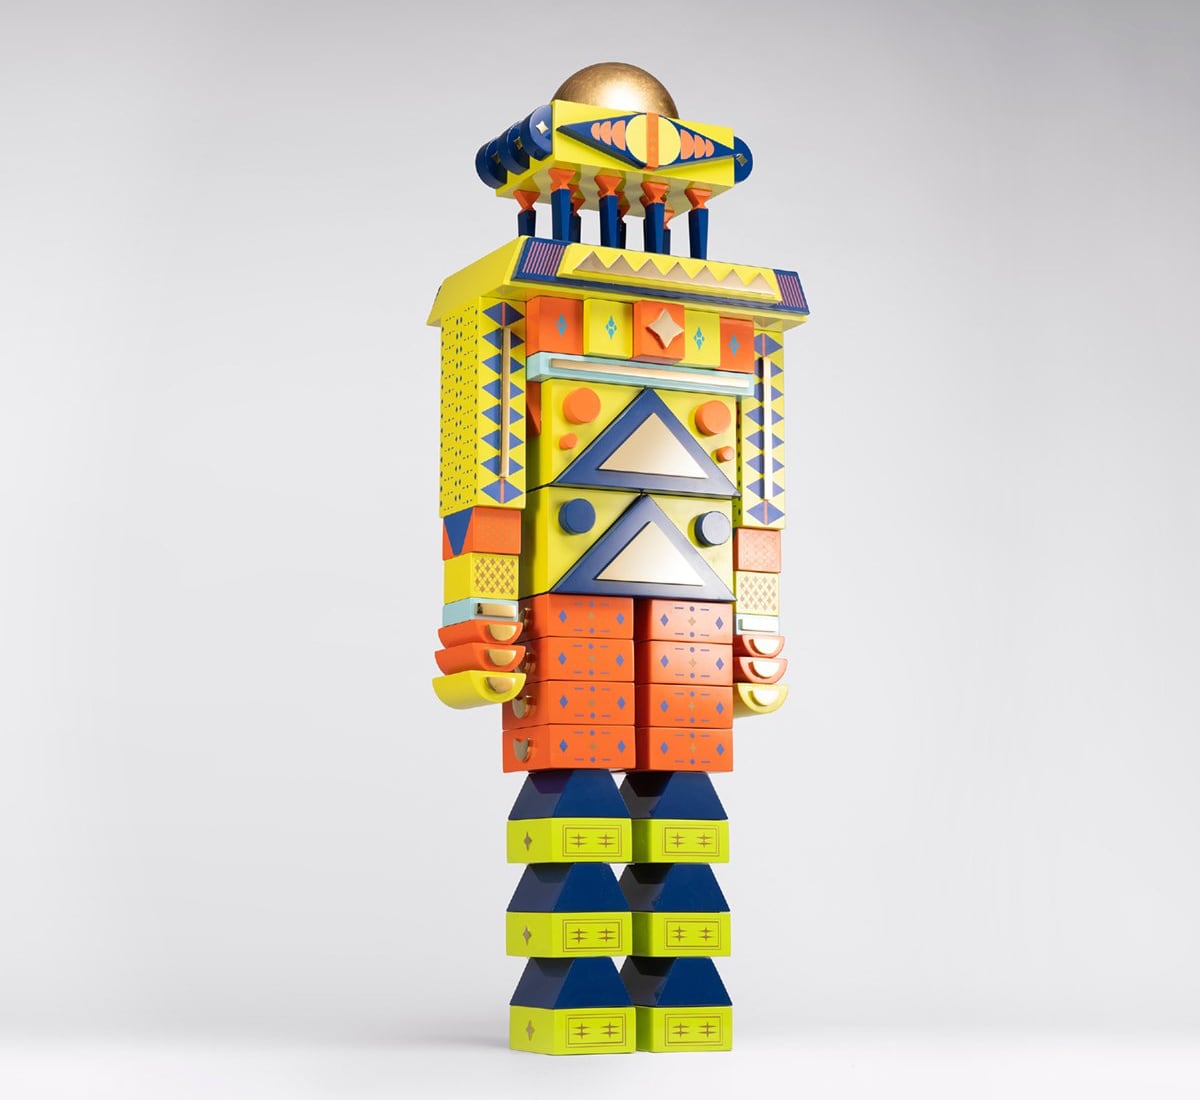 A robot-like character made of geometric blocks in yellow and orange